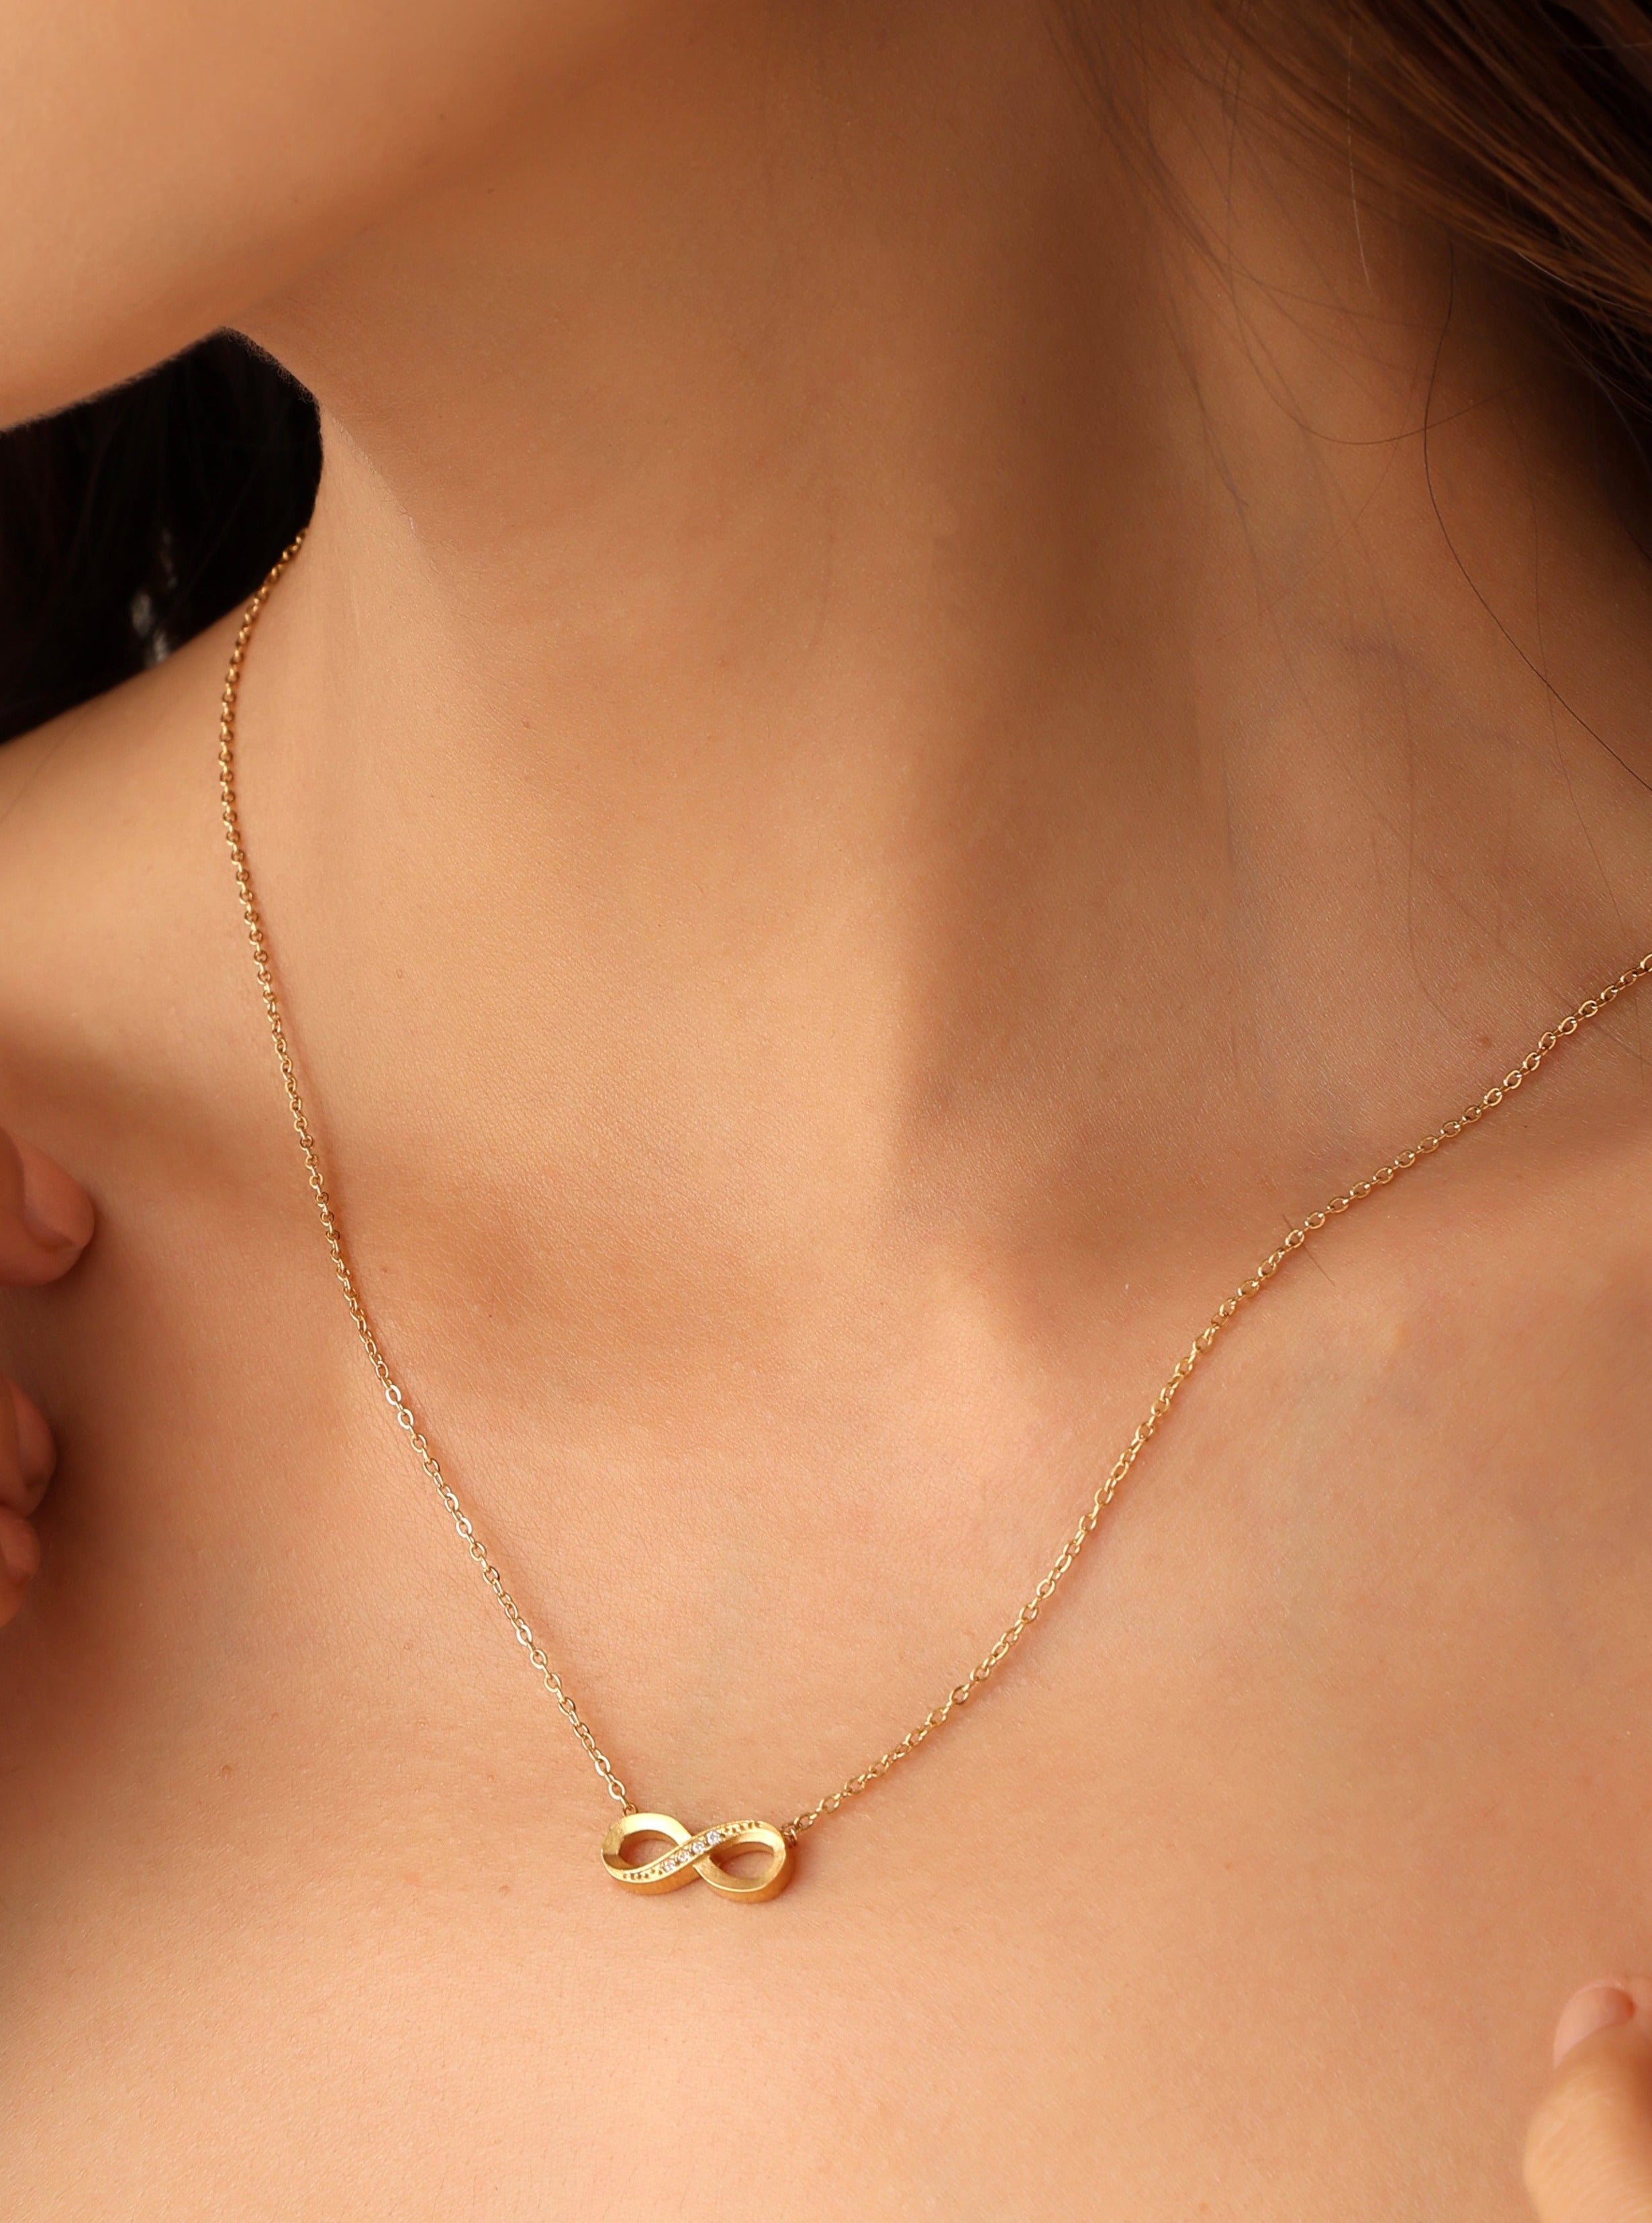 Classic Infinity Necklace